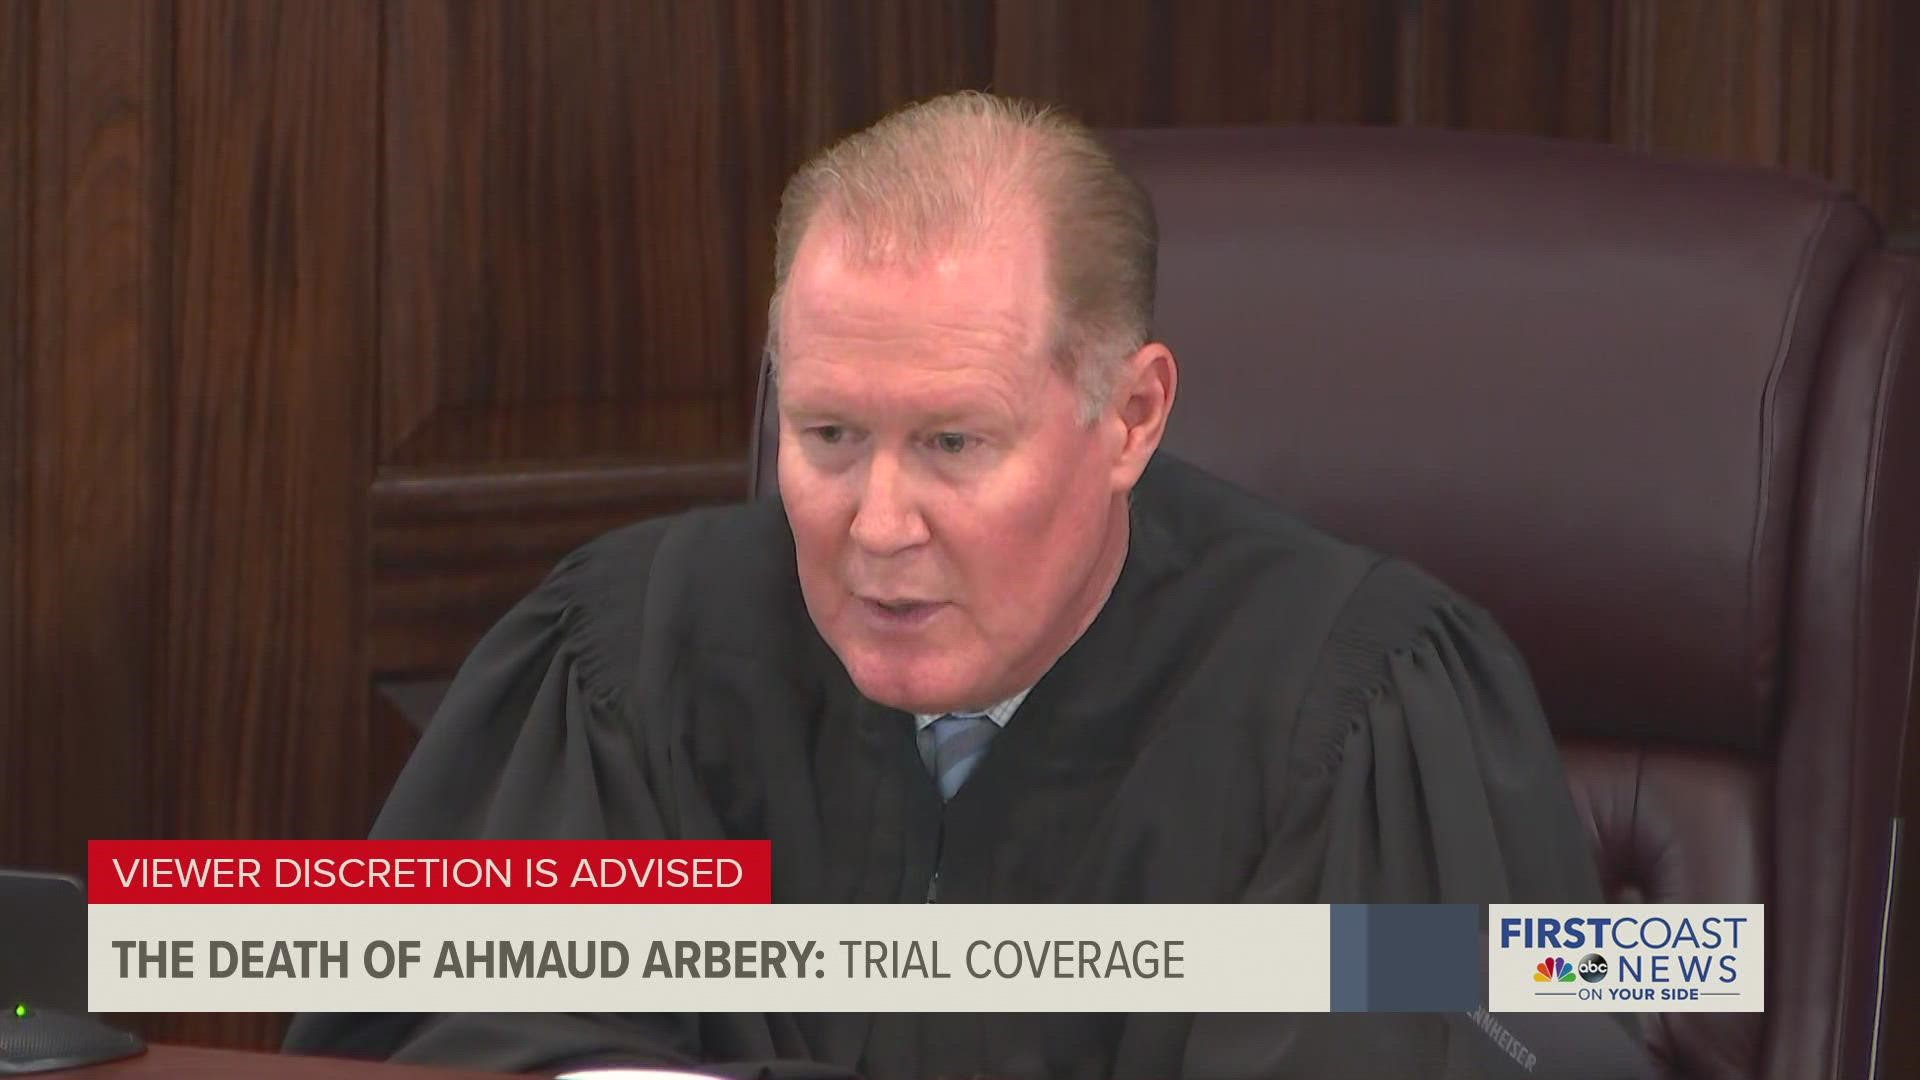 Judge Timothy Walmsley says he had to step off the bench after 'rude' comments were made.